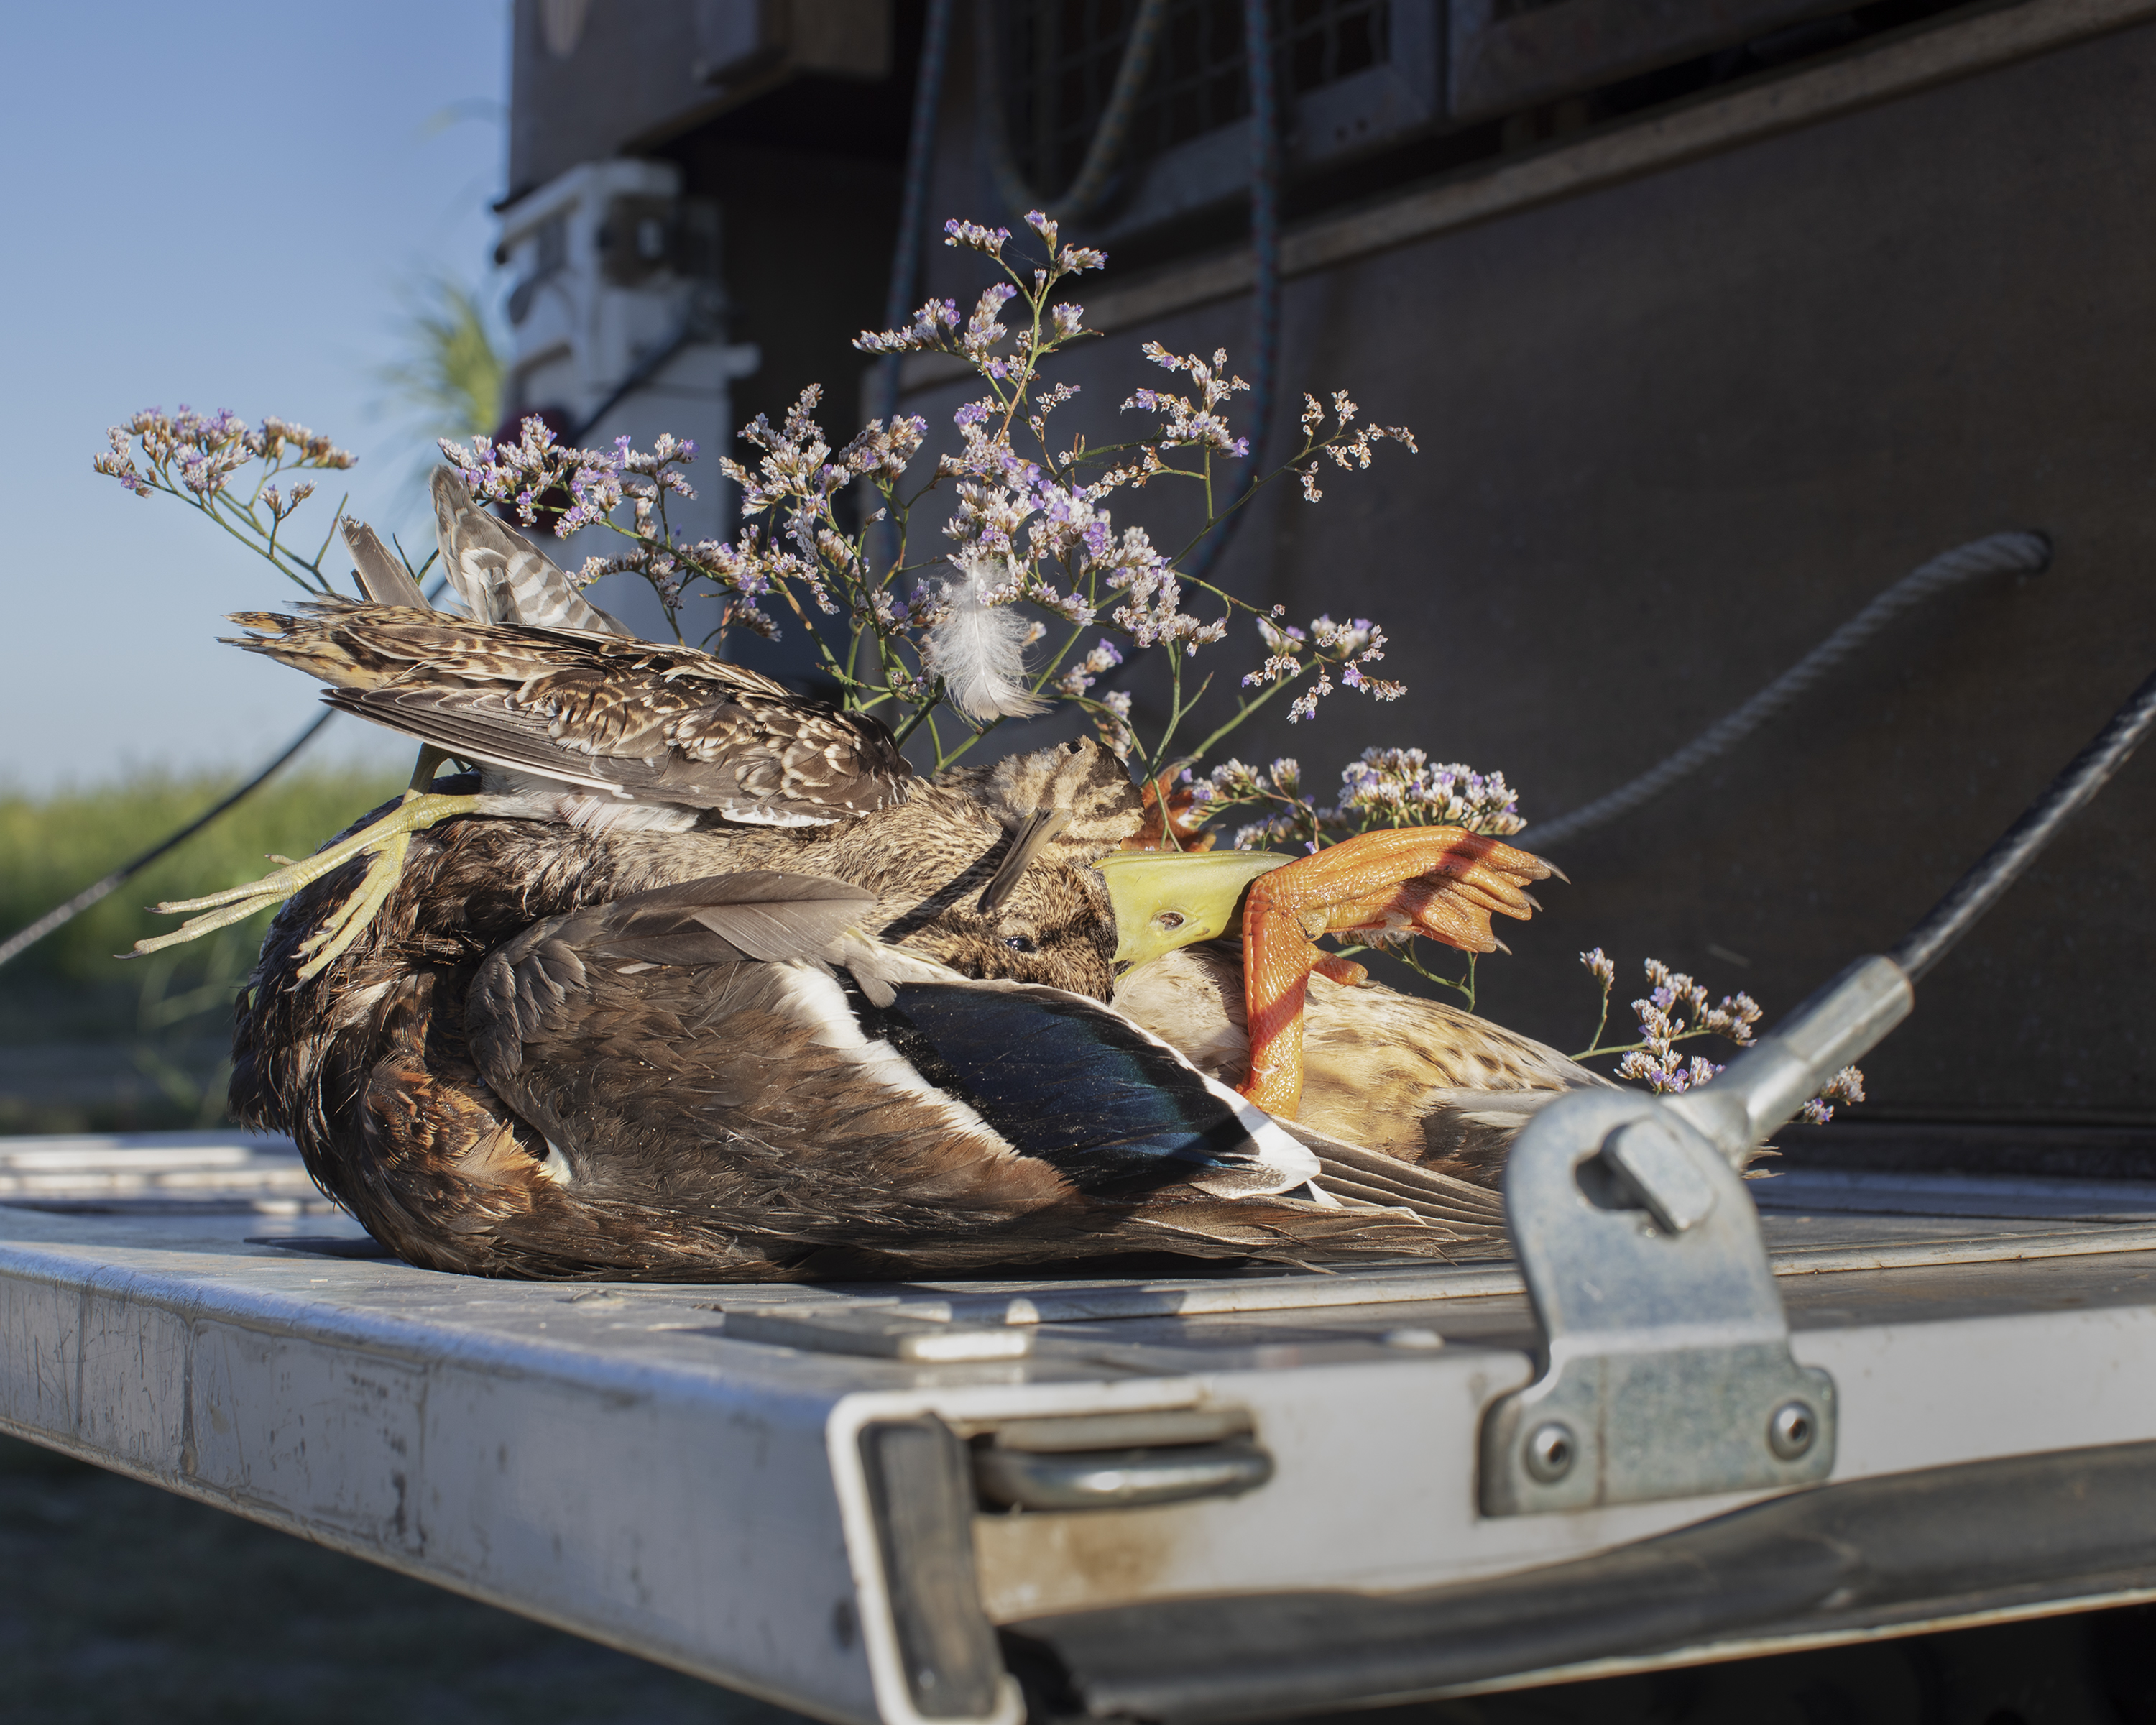 A couple snipes and a mallard duck on the back of a truck, surrounded by saladelle, a flower from Camargue, Southern France.